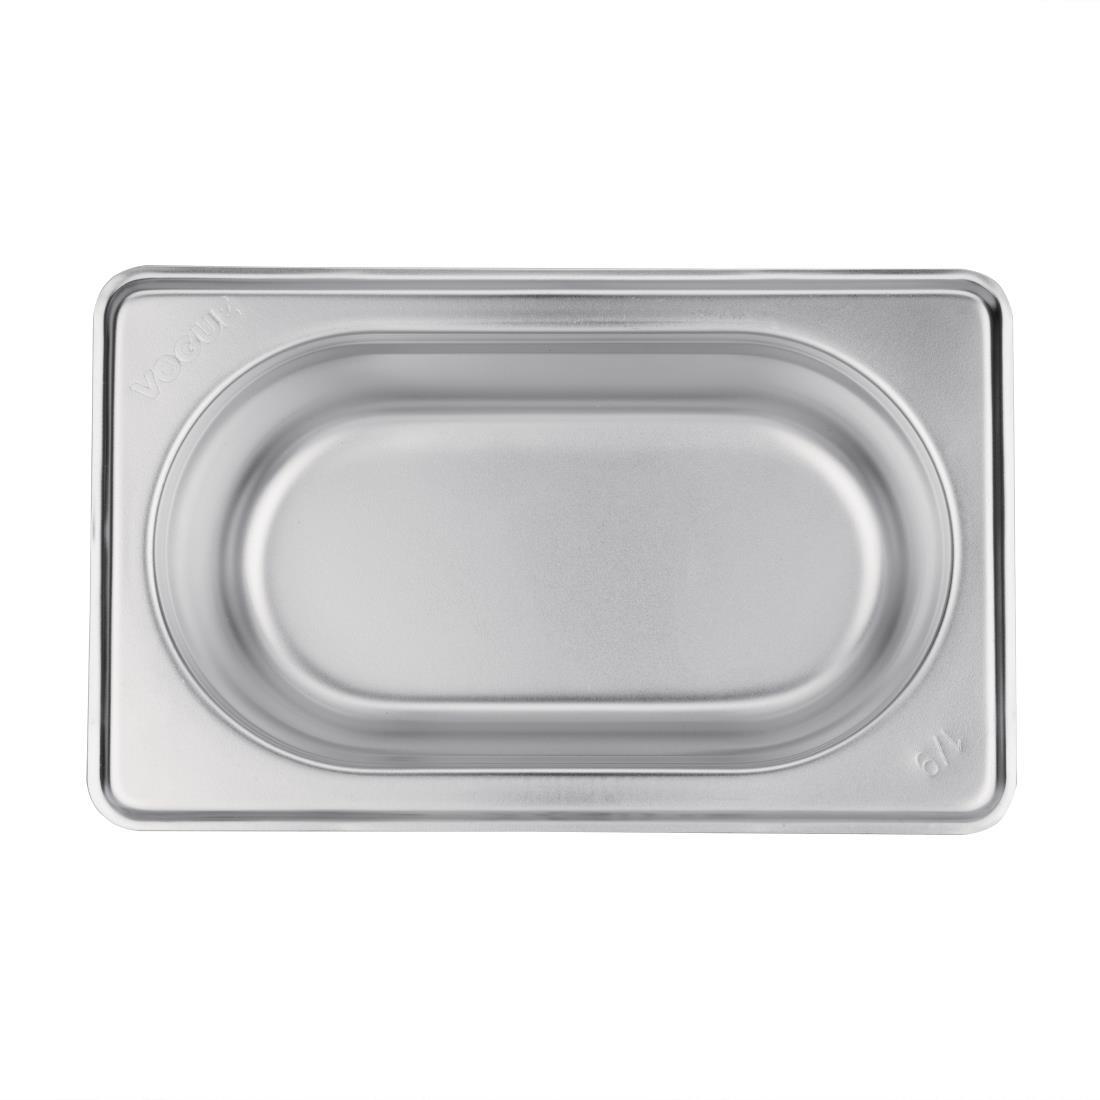 Vogue Stainless Steel 1/9 Gastronorm Pan 65mm - K824  - 4